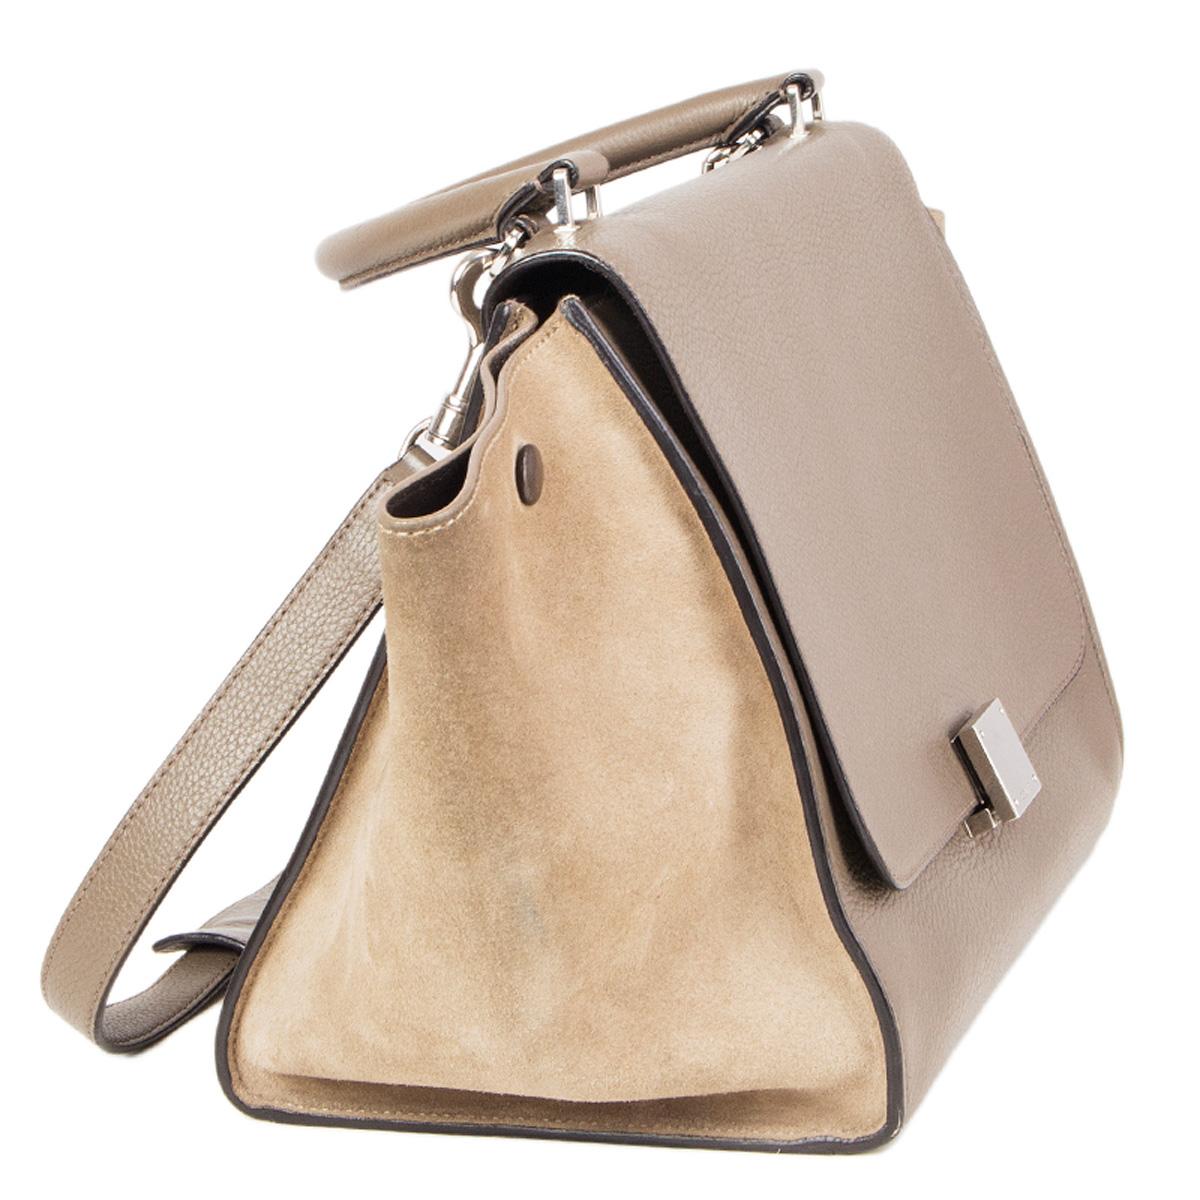 100% authentic Céline Small Trapeze bag in light beige suede and taupe grained leather. Zipper pocket on the outside back. Opens with a lock and a zipper on top. Lined in brown leather with two open pockets against the back. Has a detachable